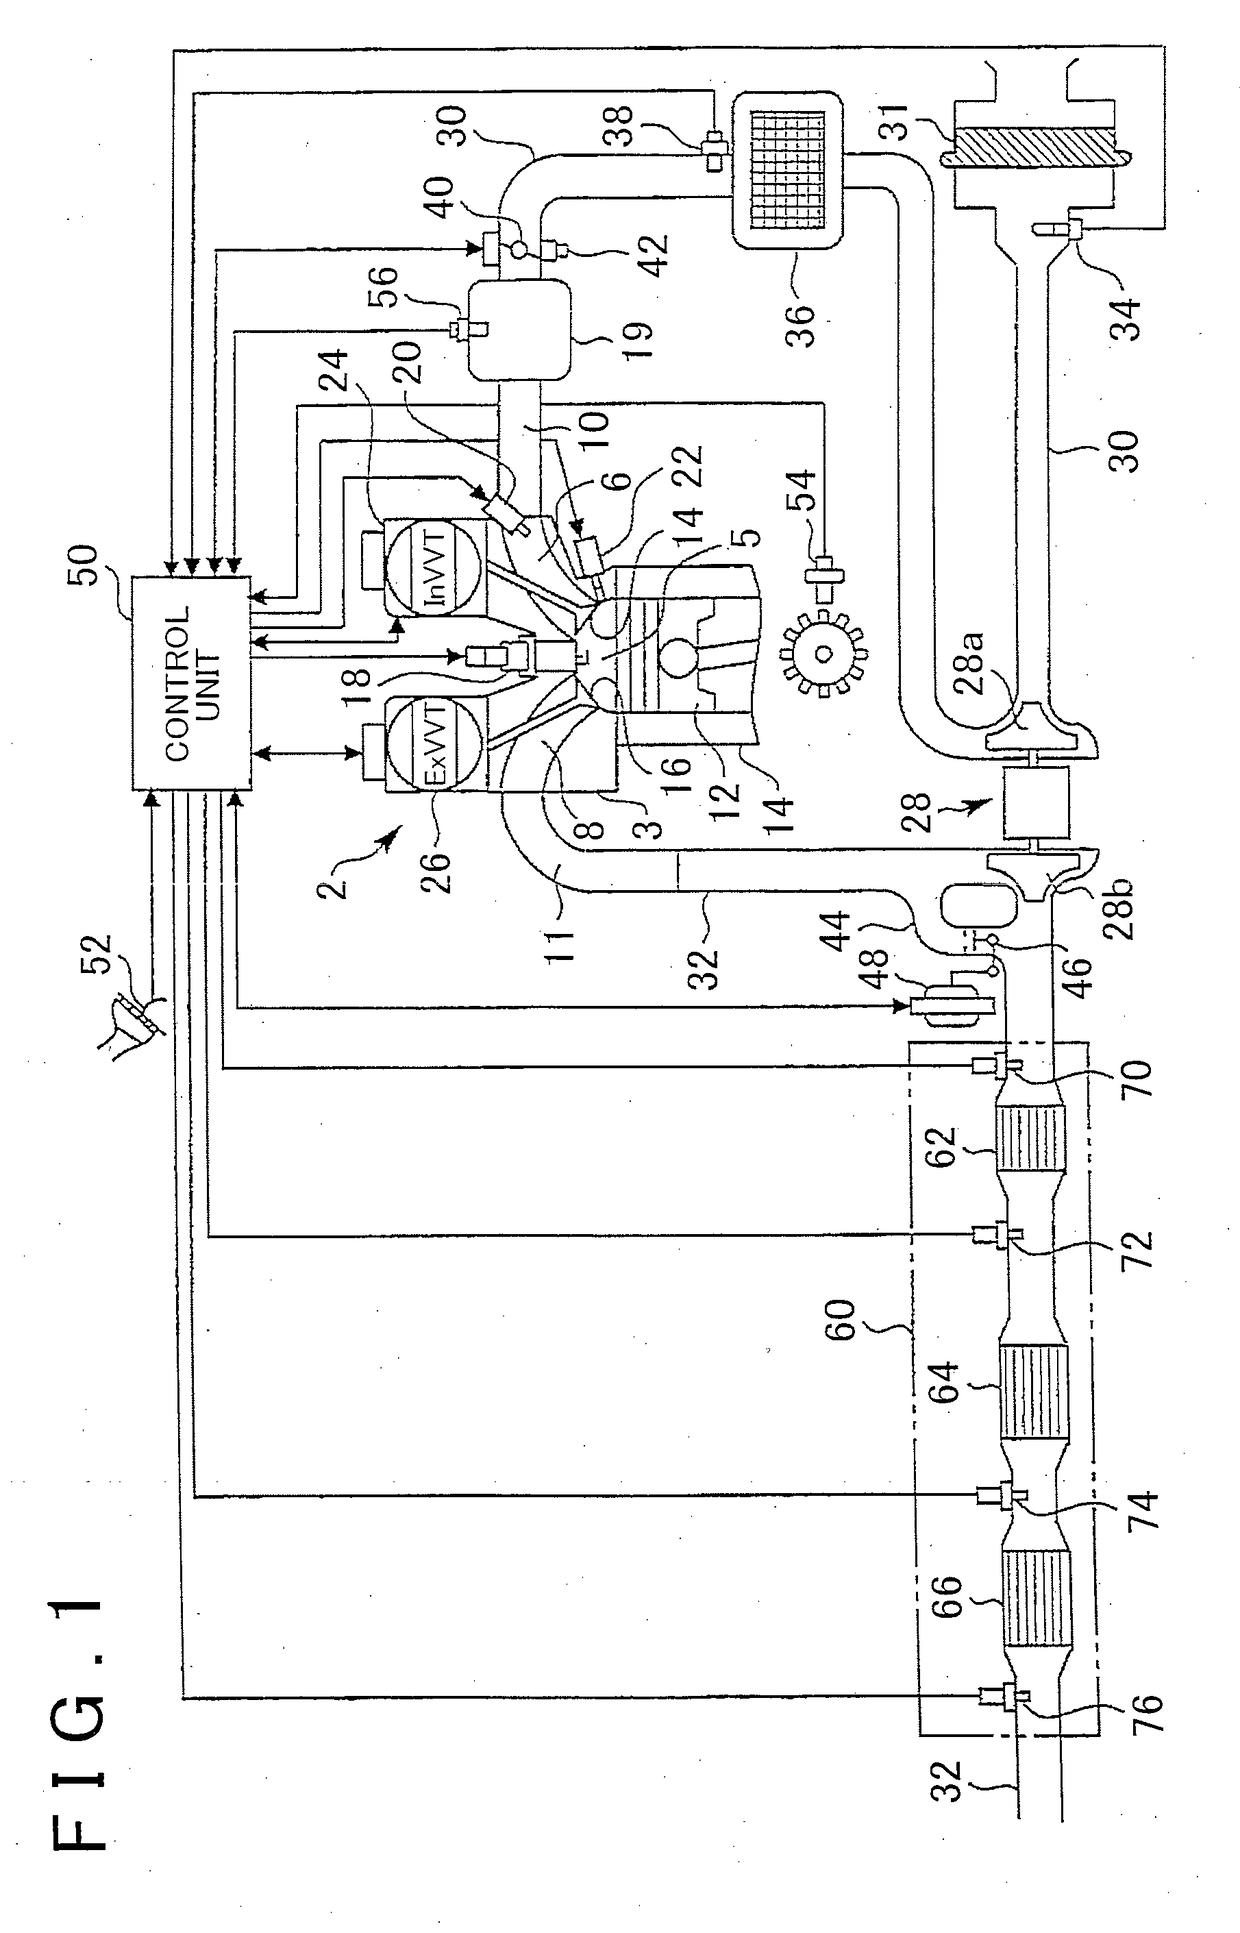 Apparatus and method for controlling an internal combustion engine